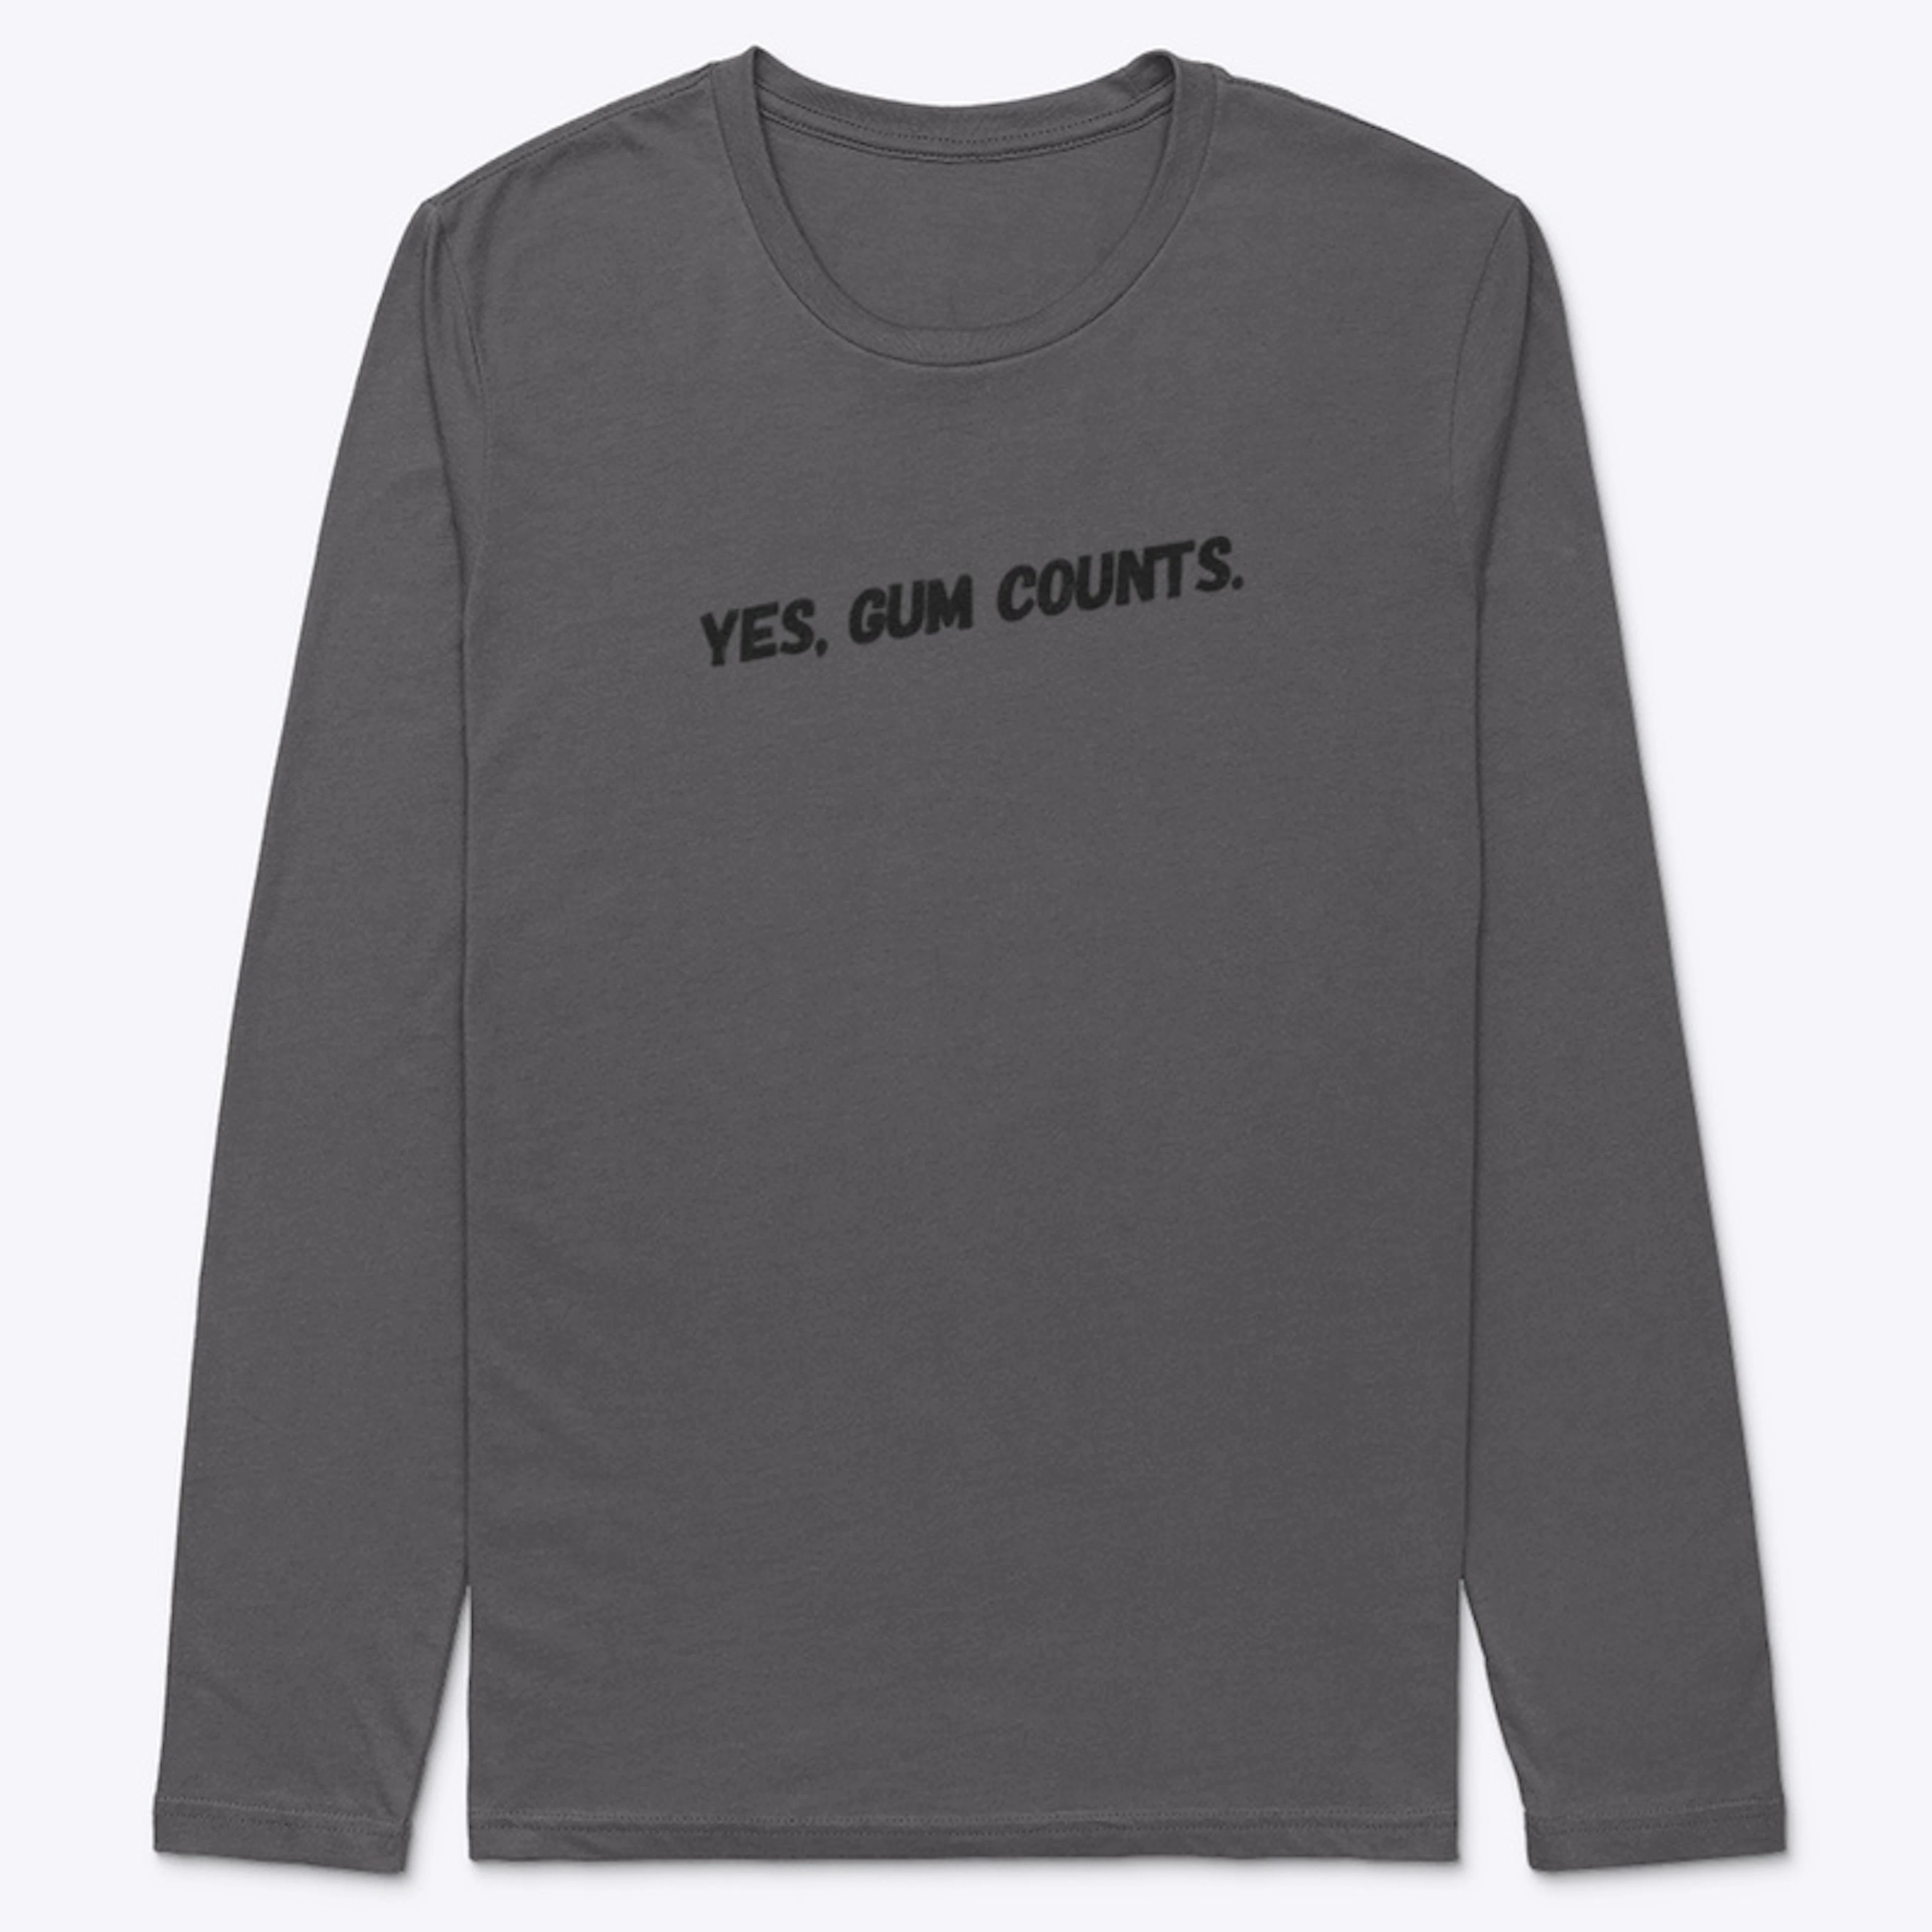 Yes, gum counts…